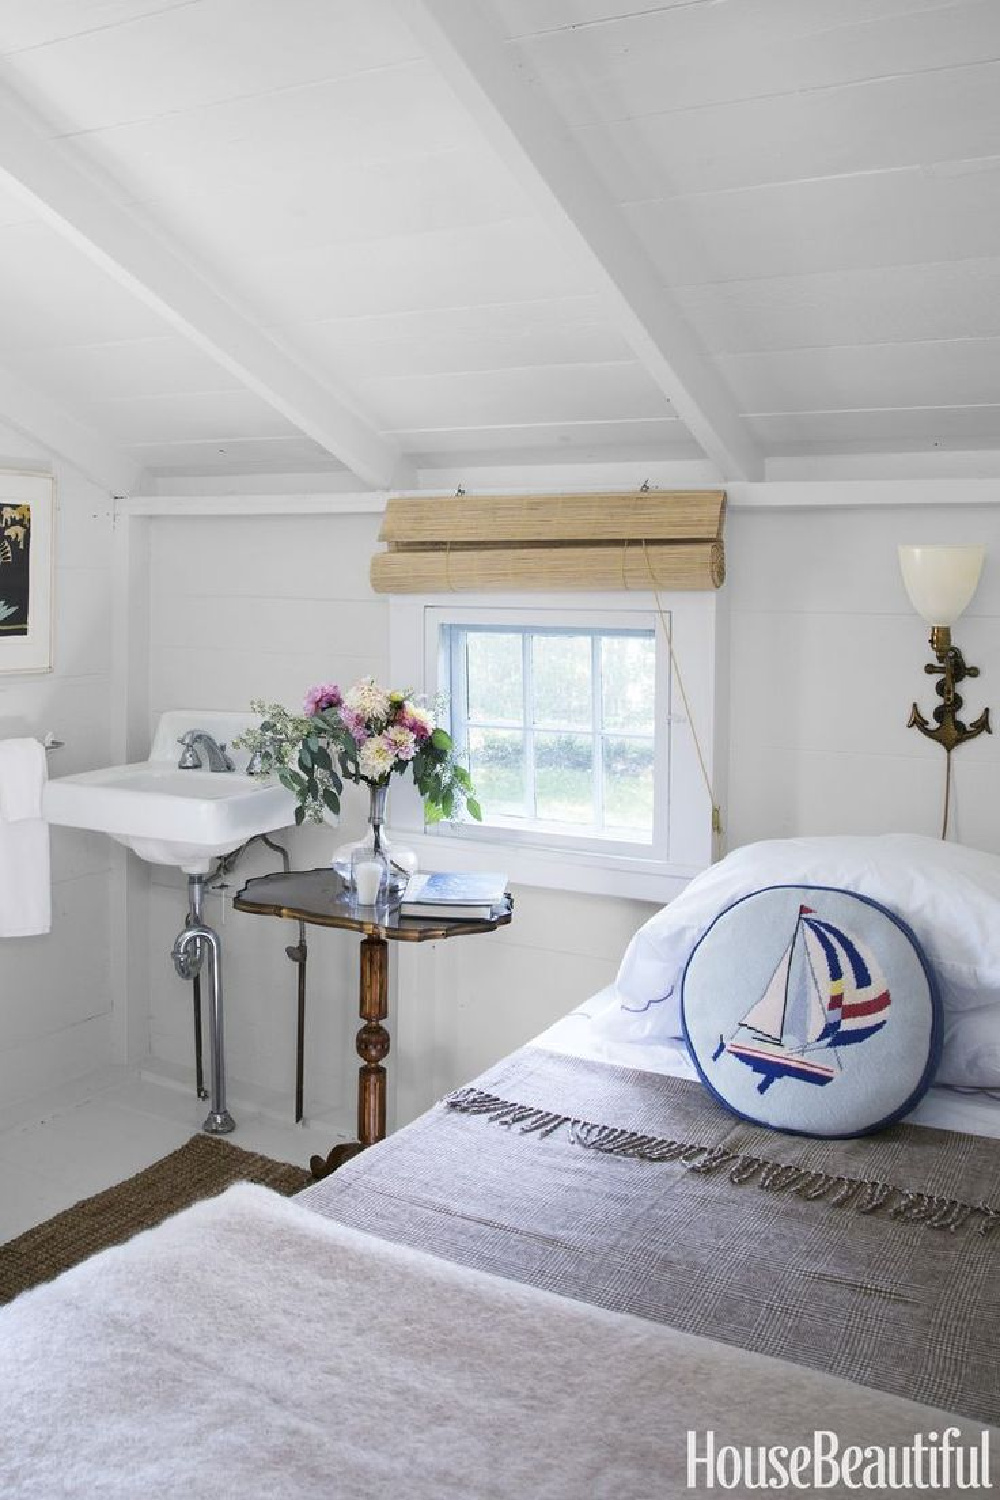 Charming white cottage style bedroom in a Nantucket cottage. COME TOUR MORE Nantucket Style Chic & Summer Vibes! #nantucket #interiordesign #designinspiration #summerliving #coastalstyle